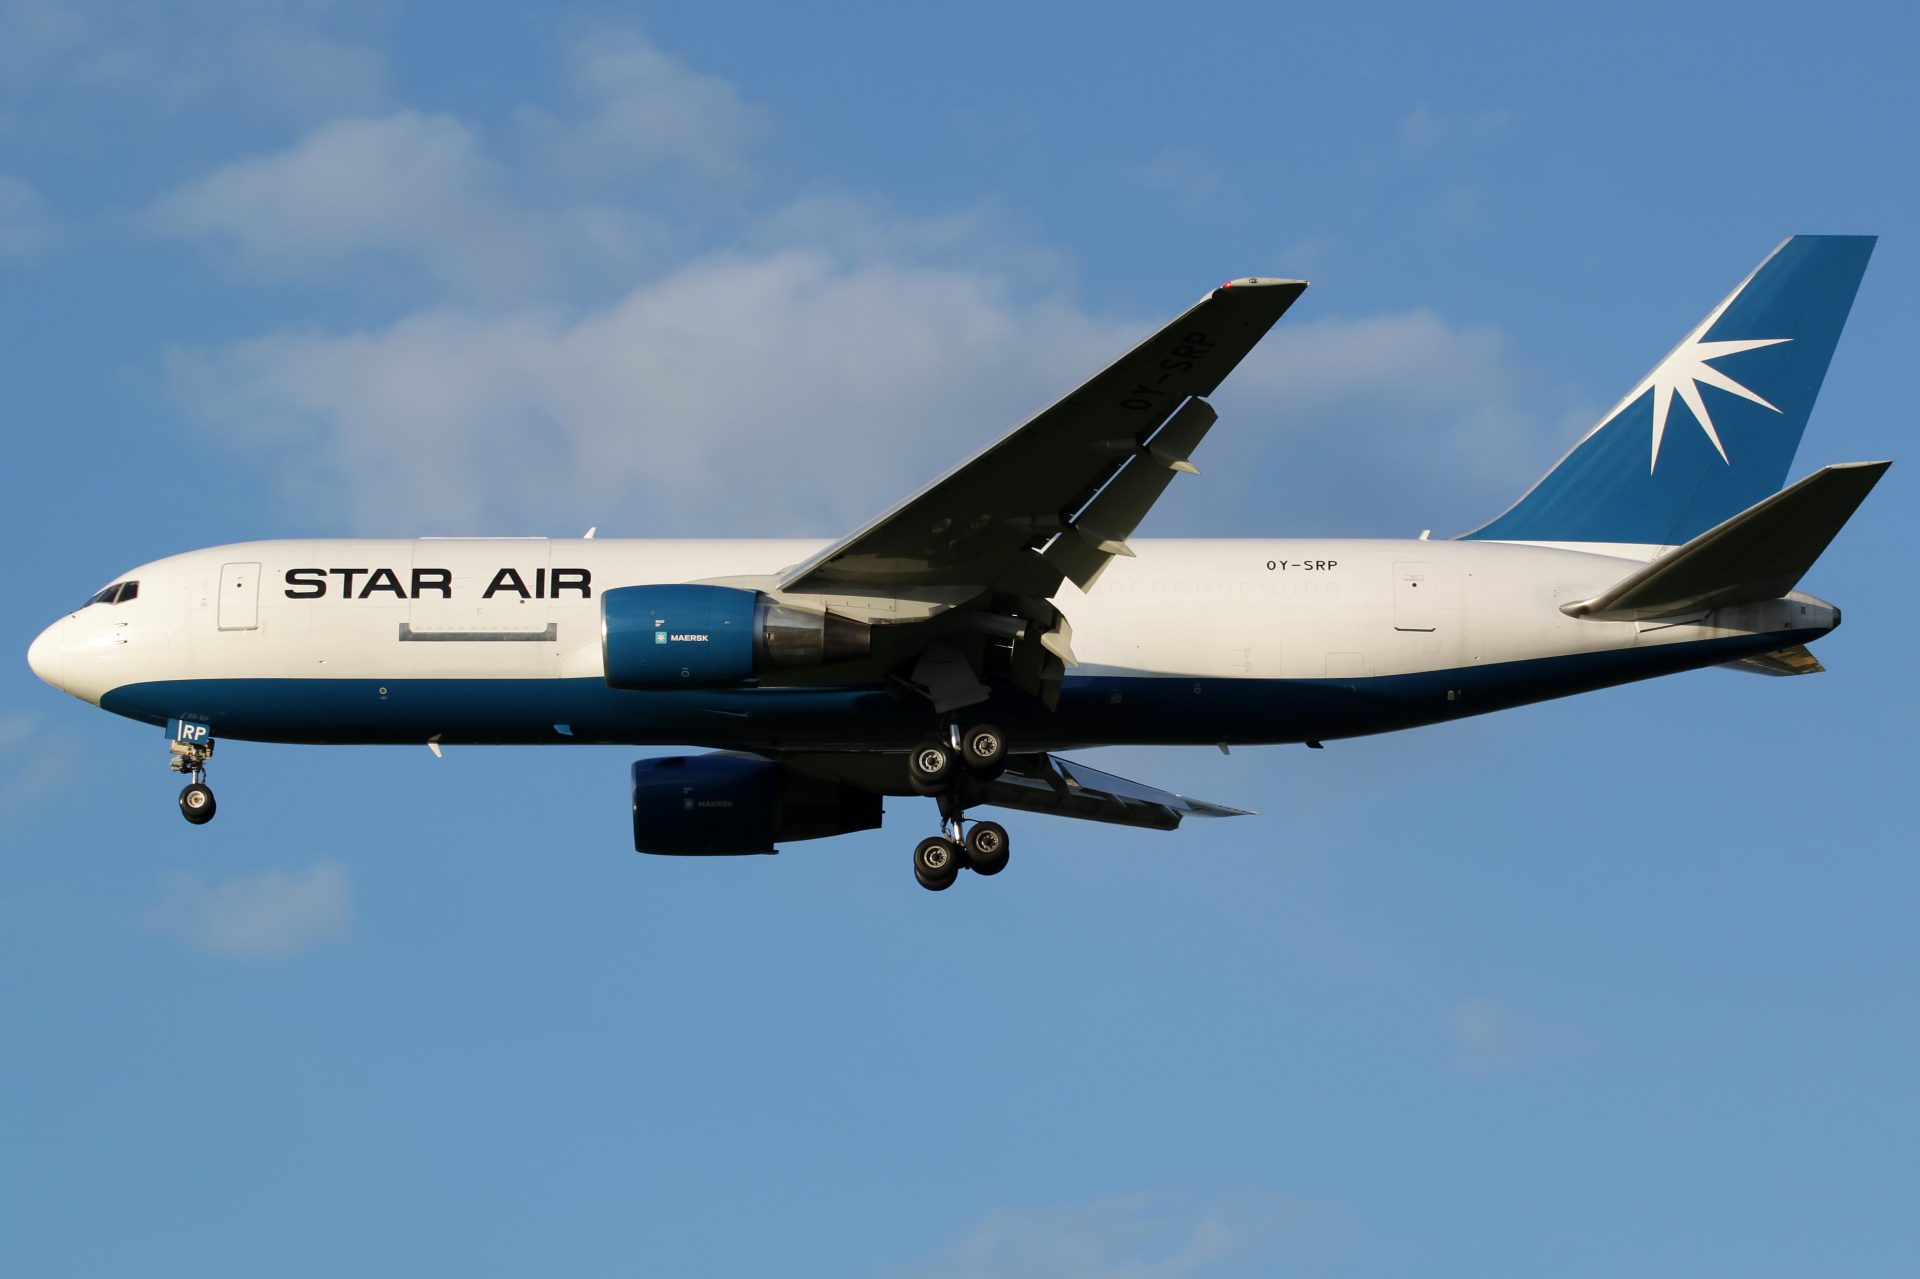 BDSF, OY-SRP, Maersk Star Air Freighter (new livery) (Aircraft » EPWA Spotting » Boeing 767-200SF)